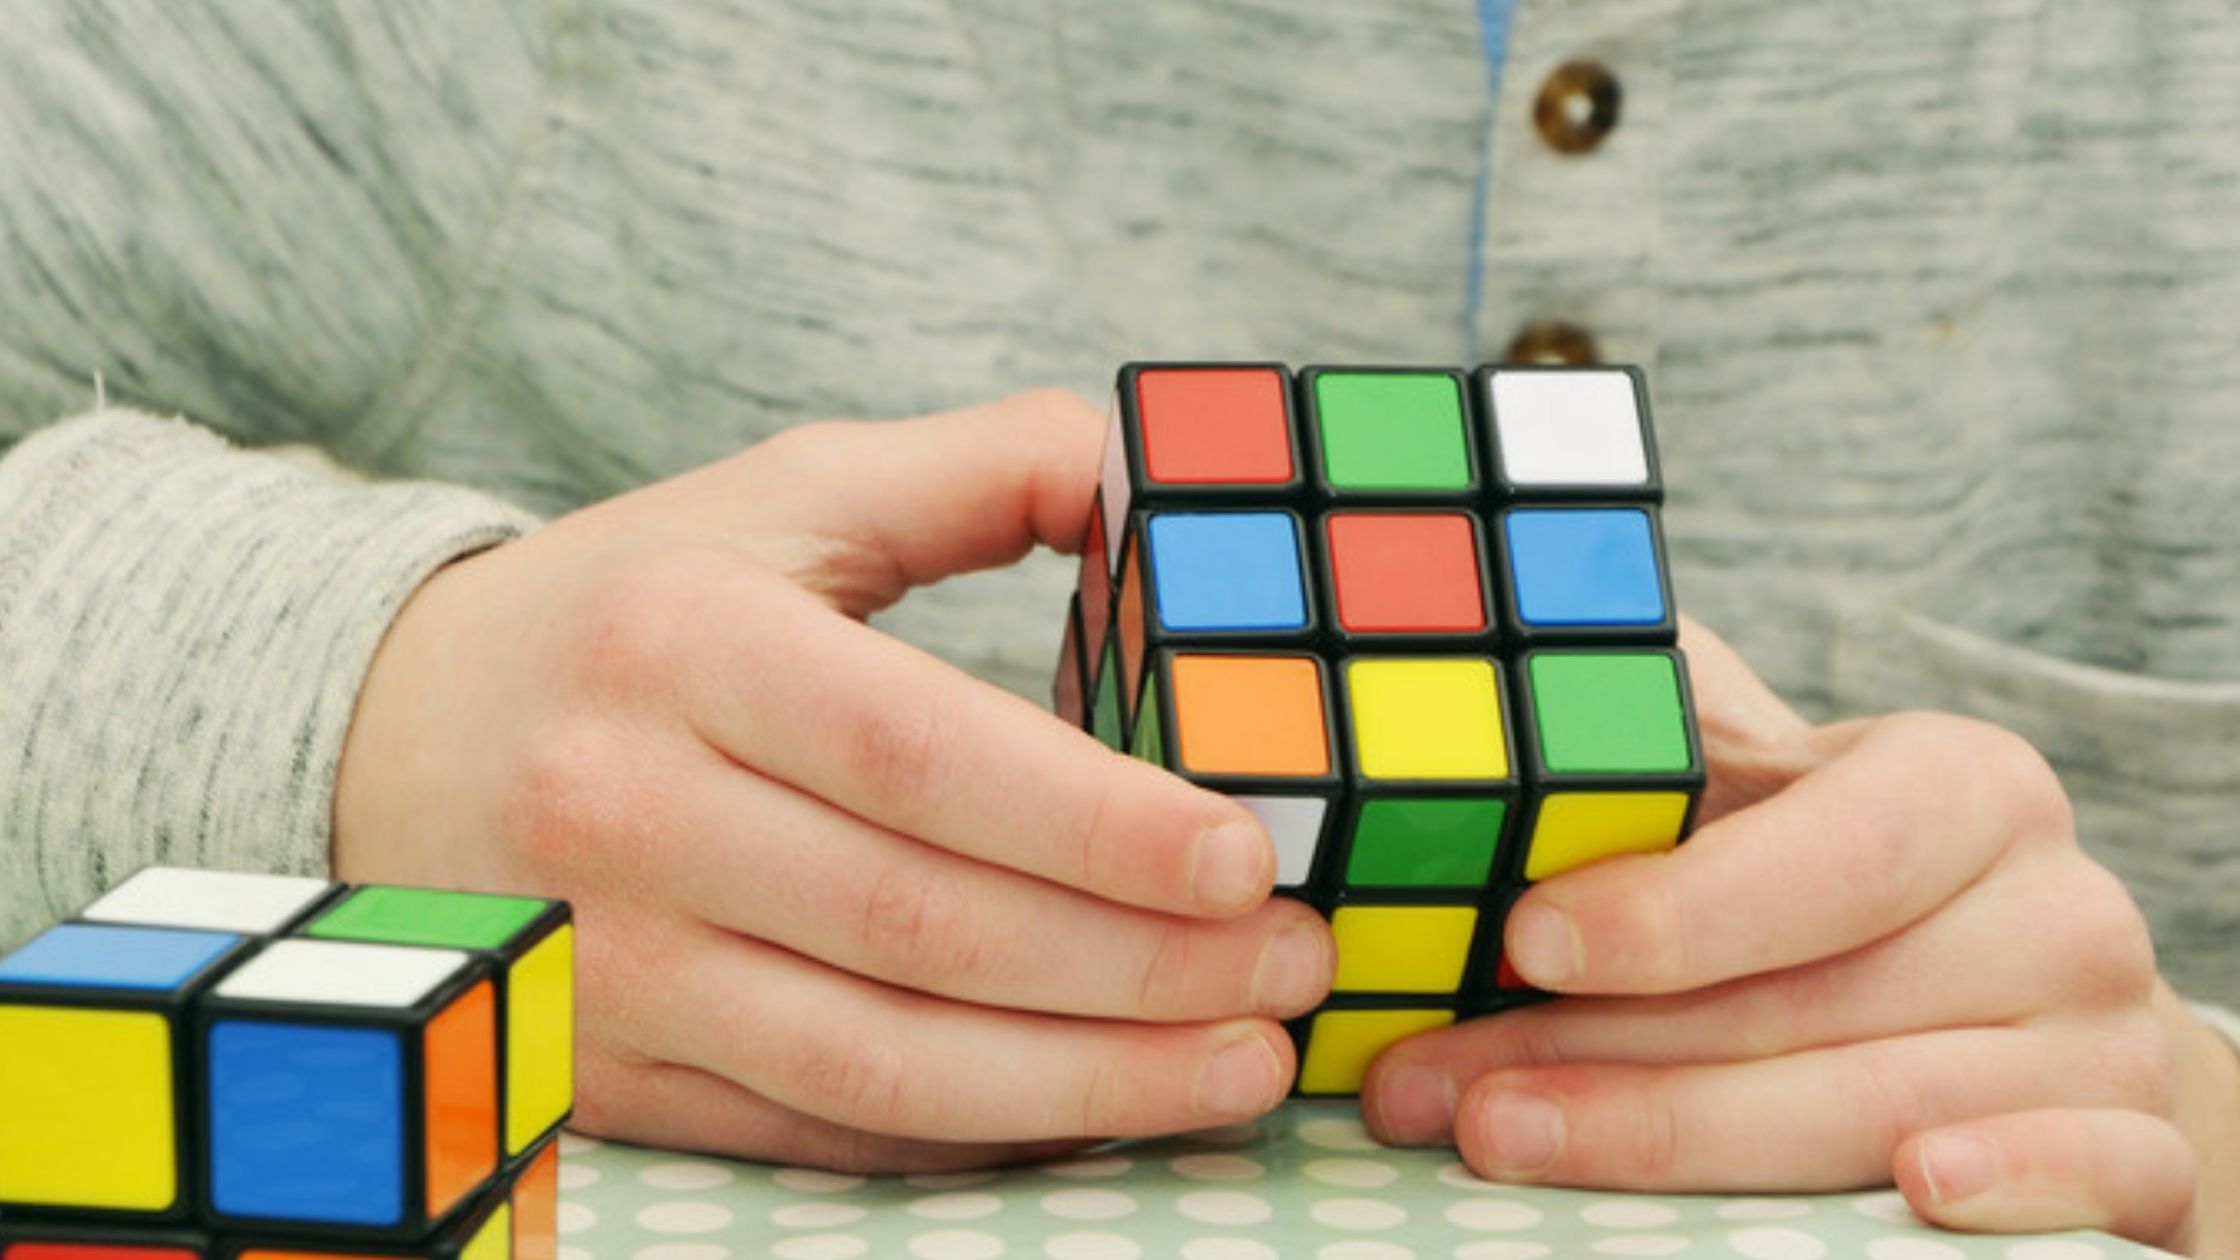 A man is solving the rubik's cube.